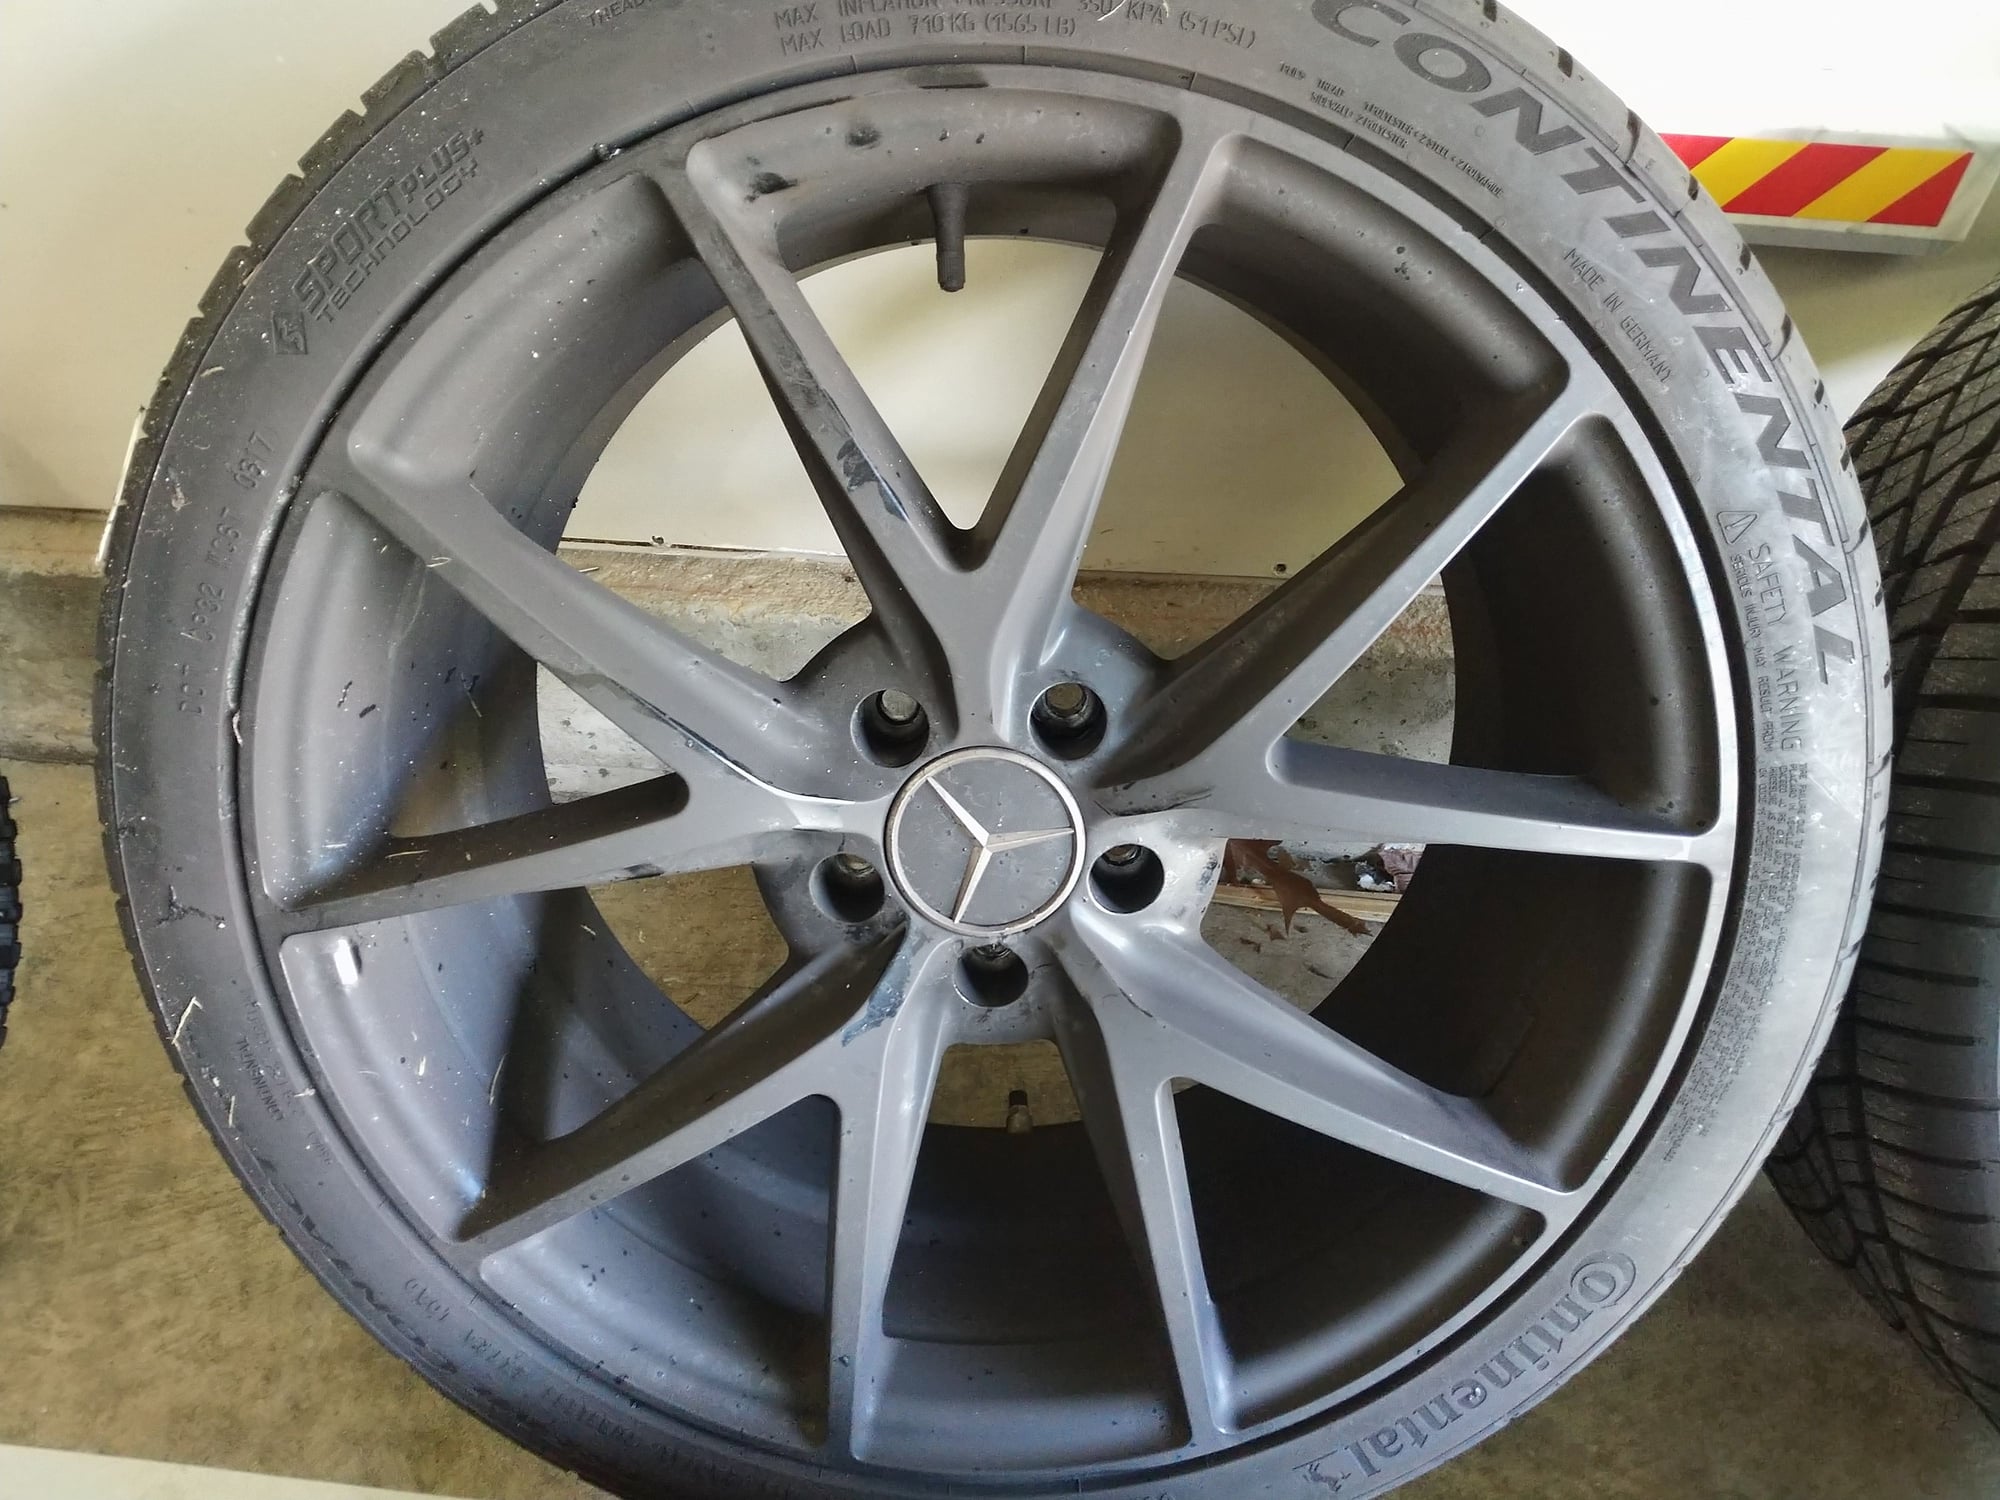 Wheels and Tires/Axles - C450/C43 aftermarket Niche Misanos with tires and spacers - Used - 2016 Mercedes-Benz C450 AMG - 2017 to 2019 Mercedes-Benz C43 AMG - 2015 to 2019 Mercedes-Benz C300 - Waldorf, MD 20601, United States